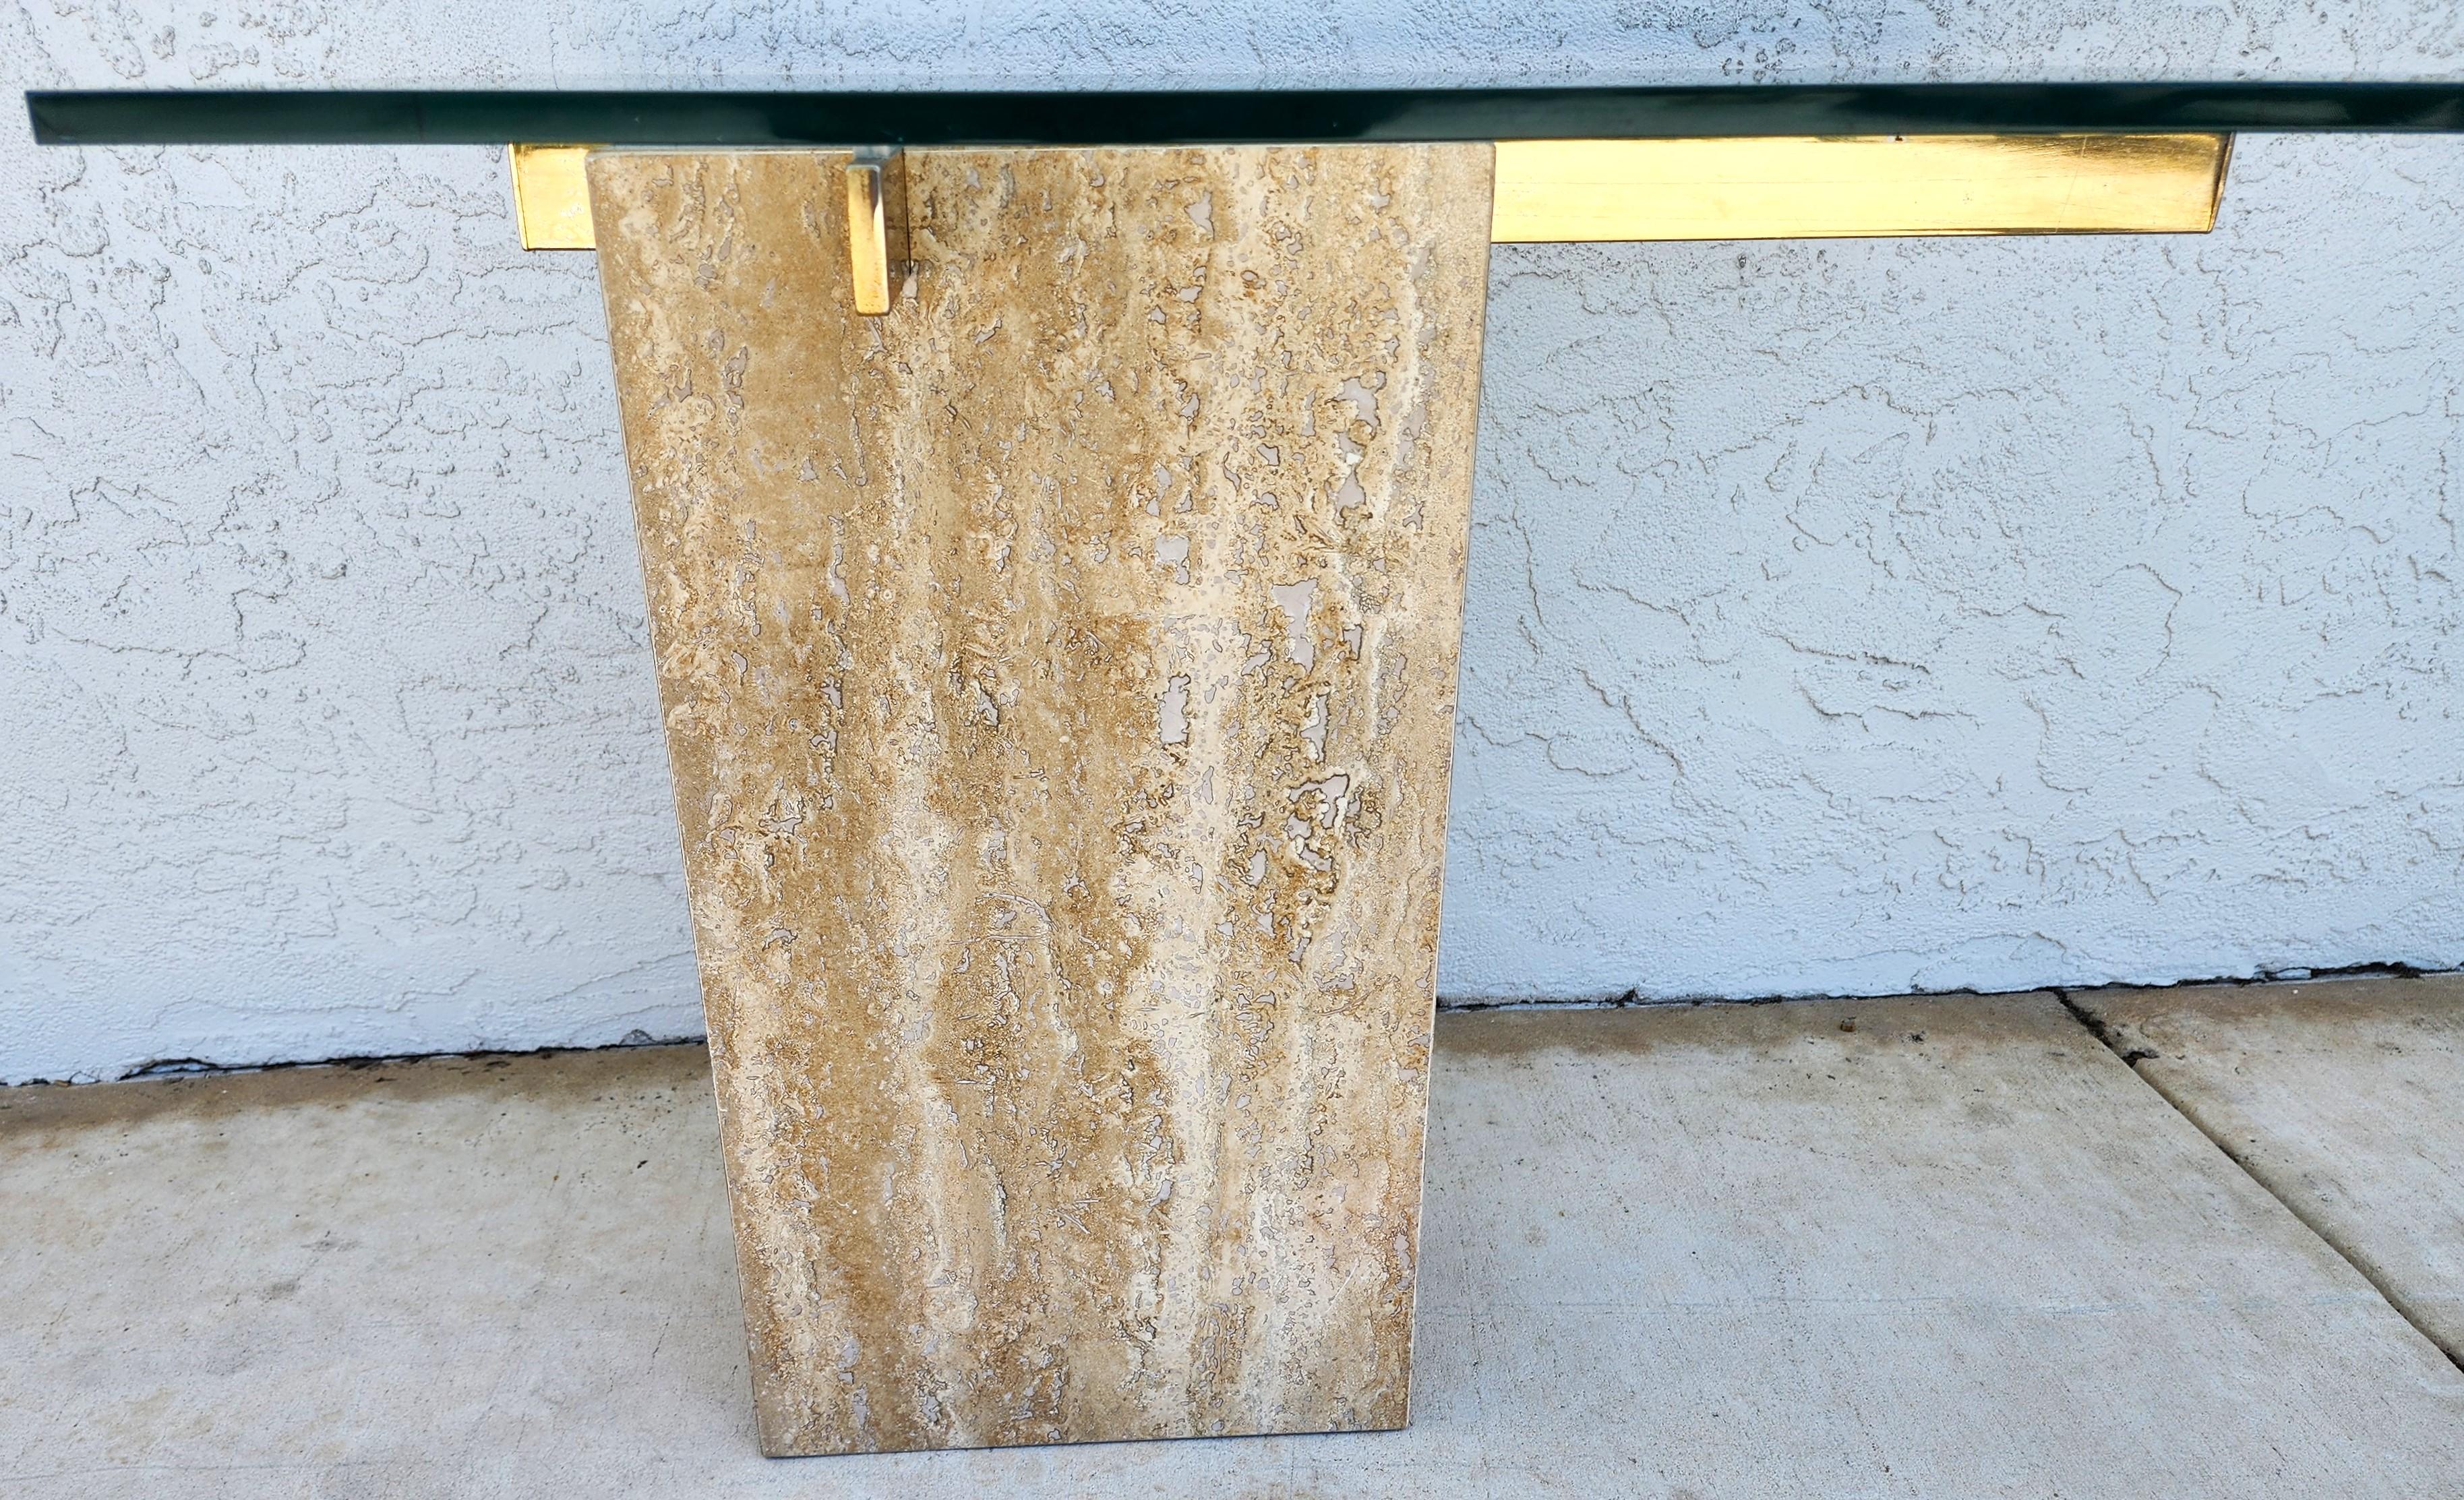 For FULL item description click on CONTINUE READING at the bottom of this page.

Offering One Of Our Recent Palm Beach Estate Fine Furniture Acquisitions Of A
1970s Travertine Side Table Marble Glass by ARTEDI

Approximate Measurements in